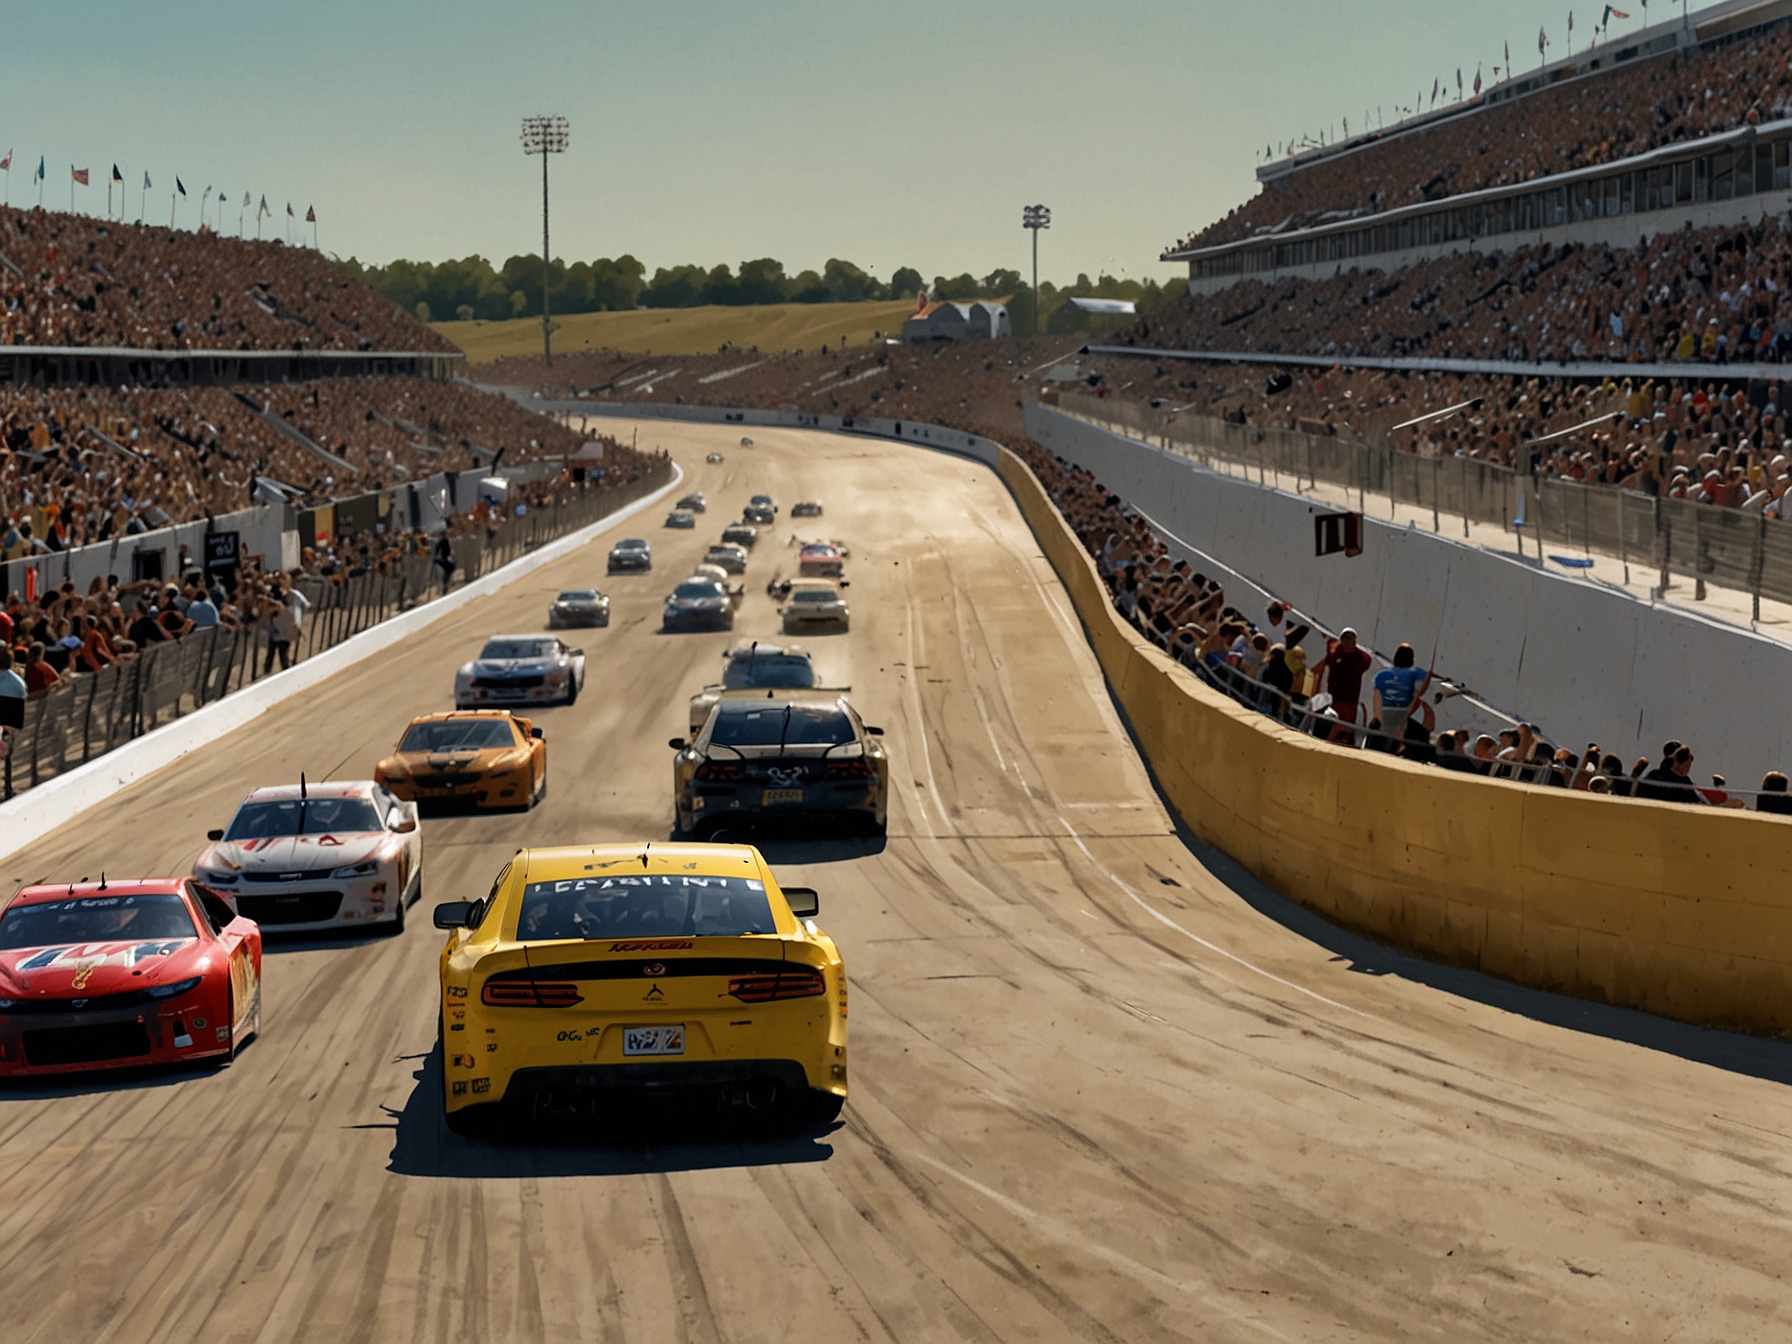 A high-action moment during the Iowa Corn 350 race, showcasing Ryan Blaney's No. 12 car leading the pack through Iowa Speedway's multi-groove layout, with grandstands filled with cheering fans.